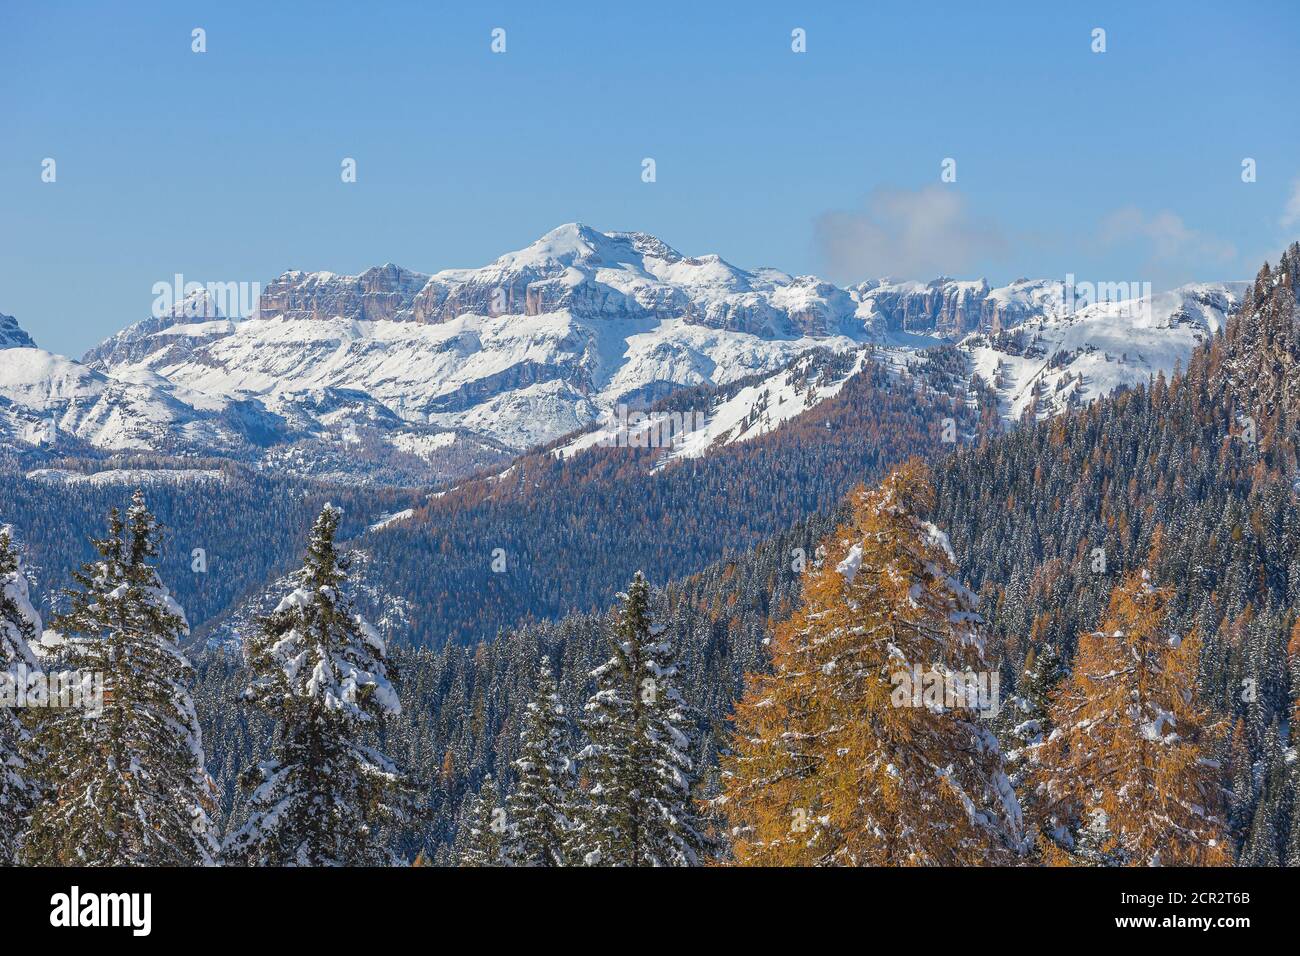 Larch and fir forest and in the background the Sella Massif, Dolomites, Italy Stock Photo